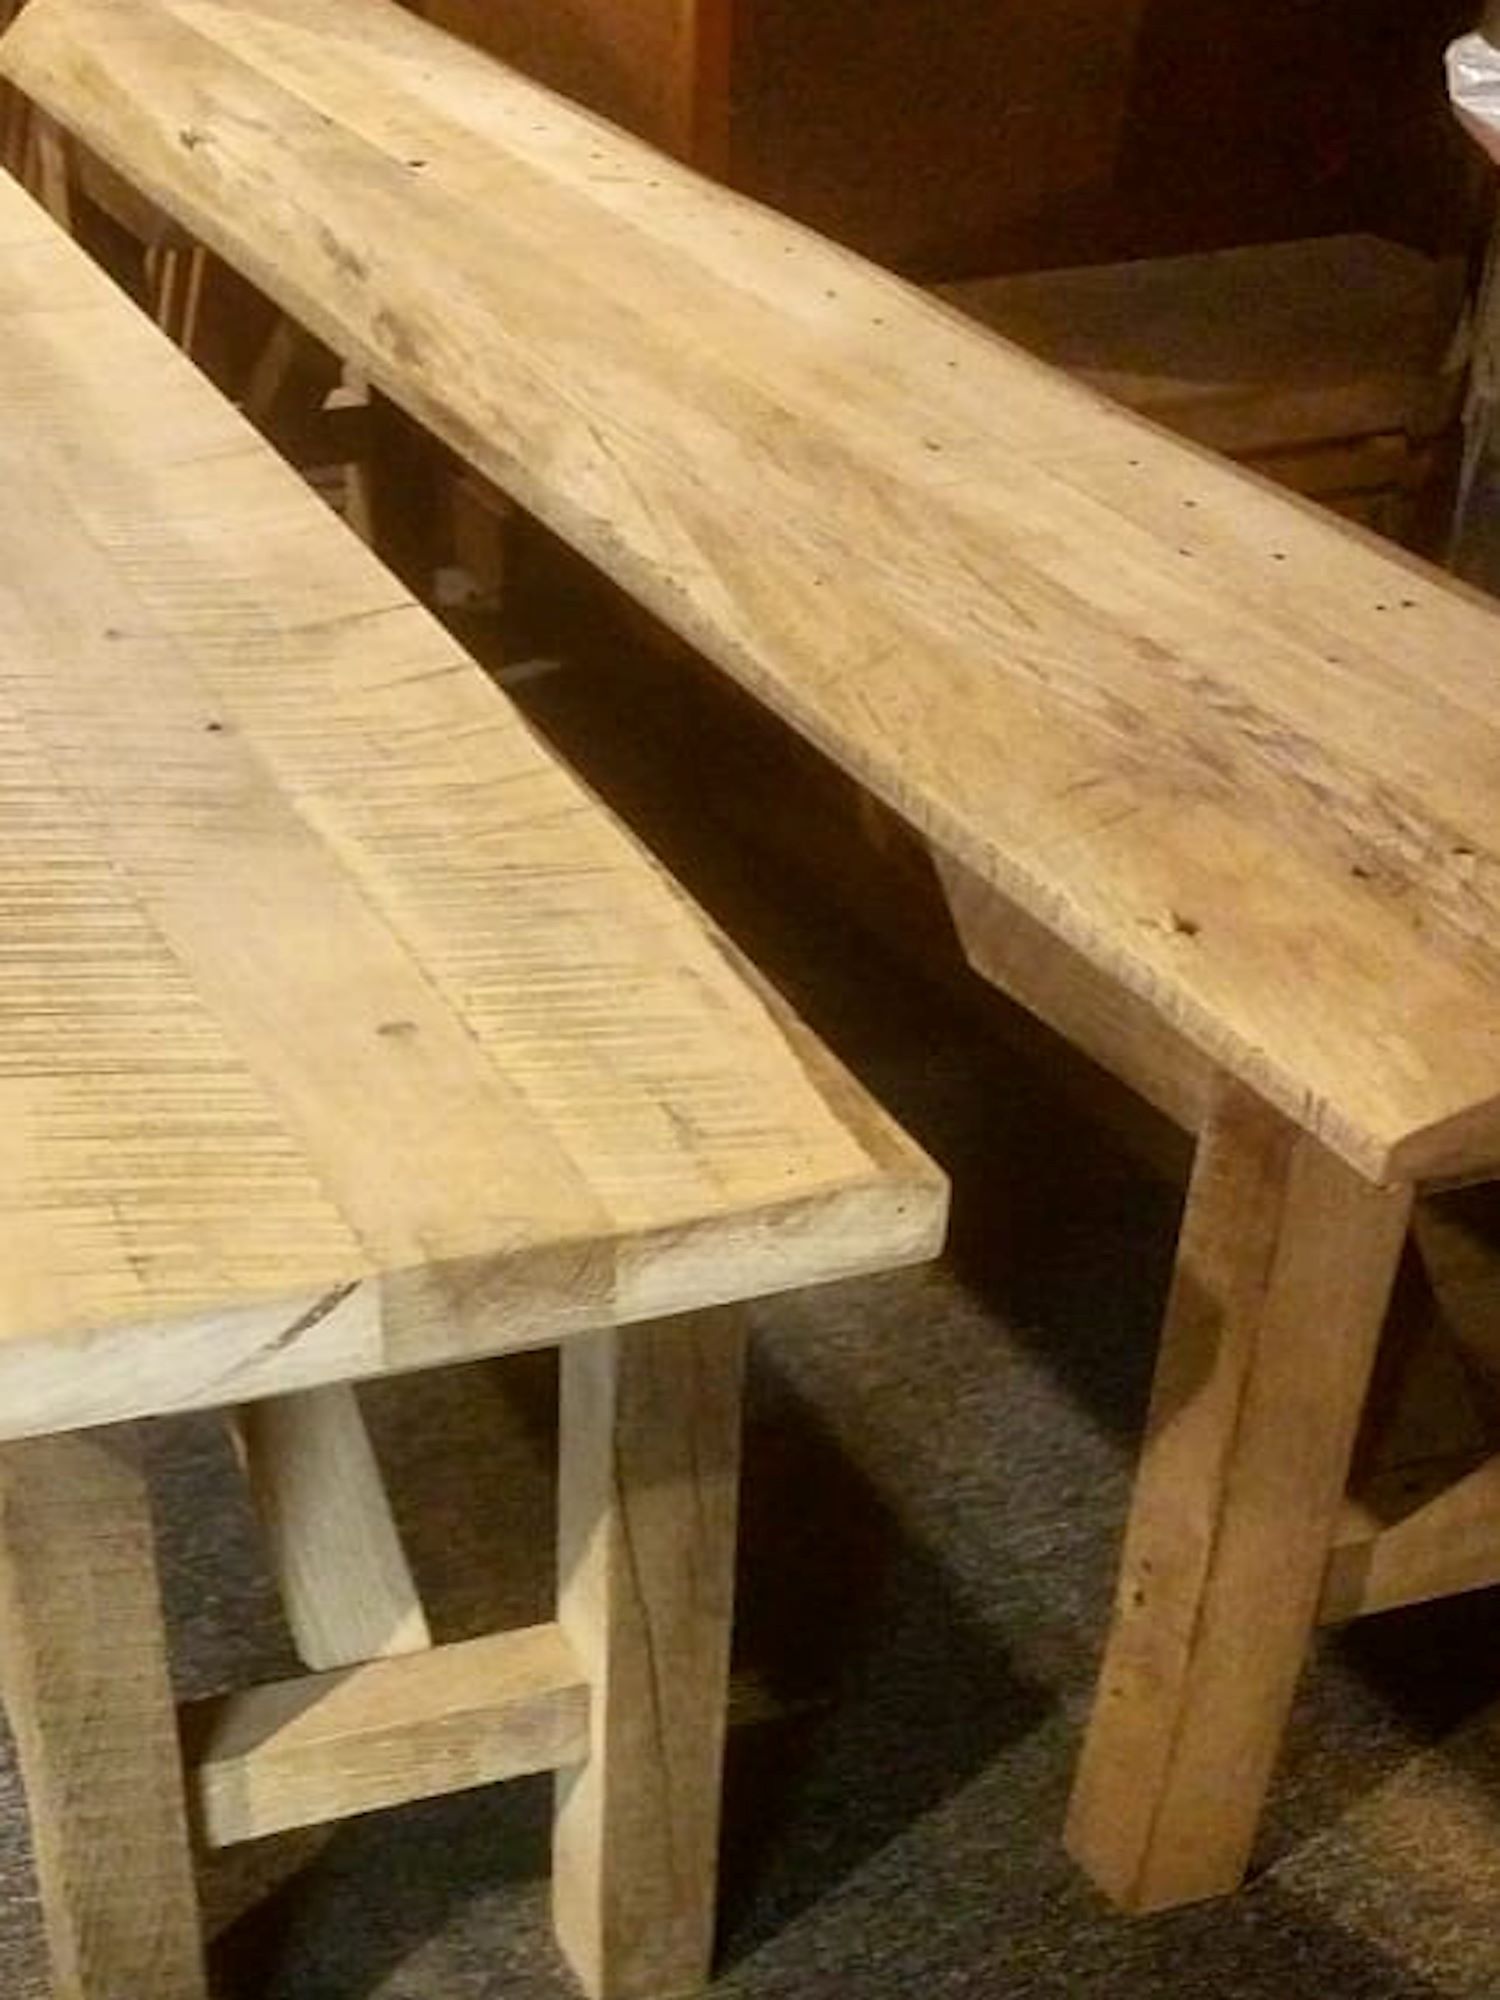 Two barnwood benches without a wood stain